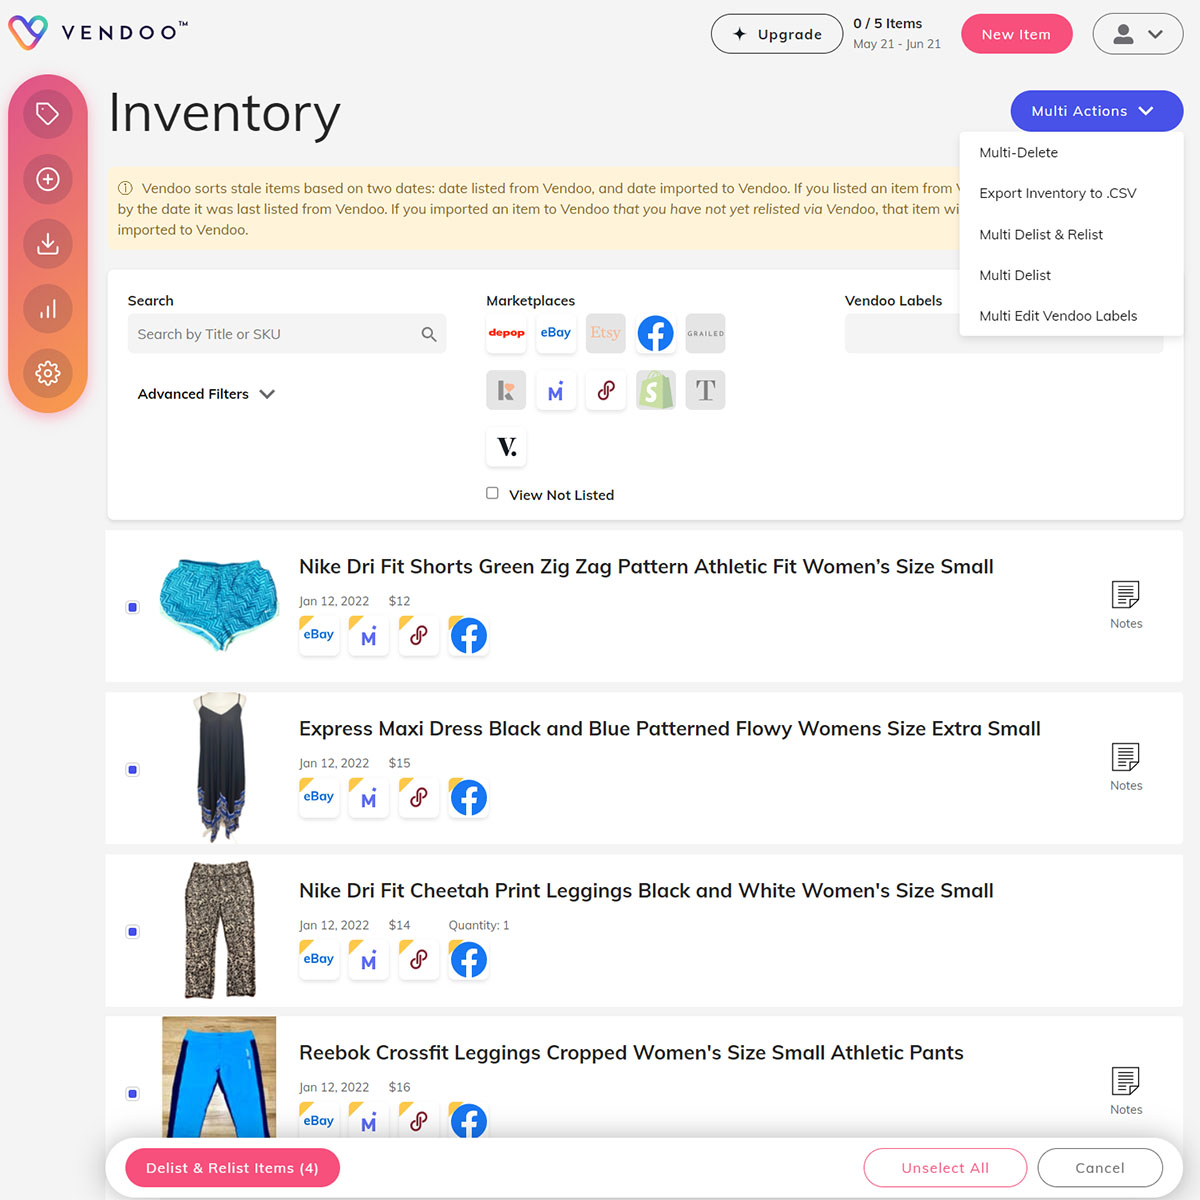 a screenshot of the vendoo website showing inventory and multi actions menu.